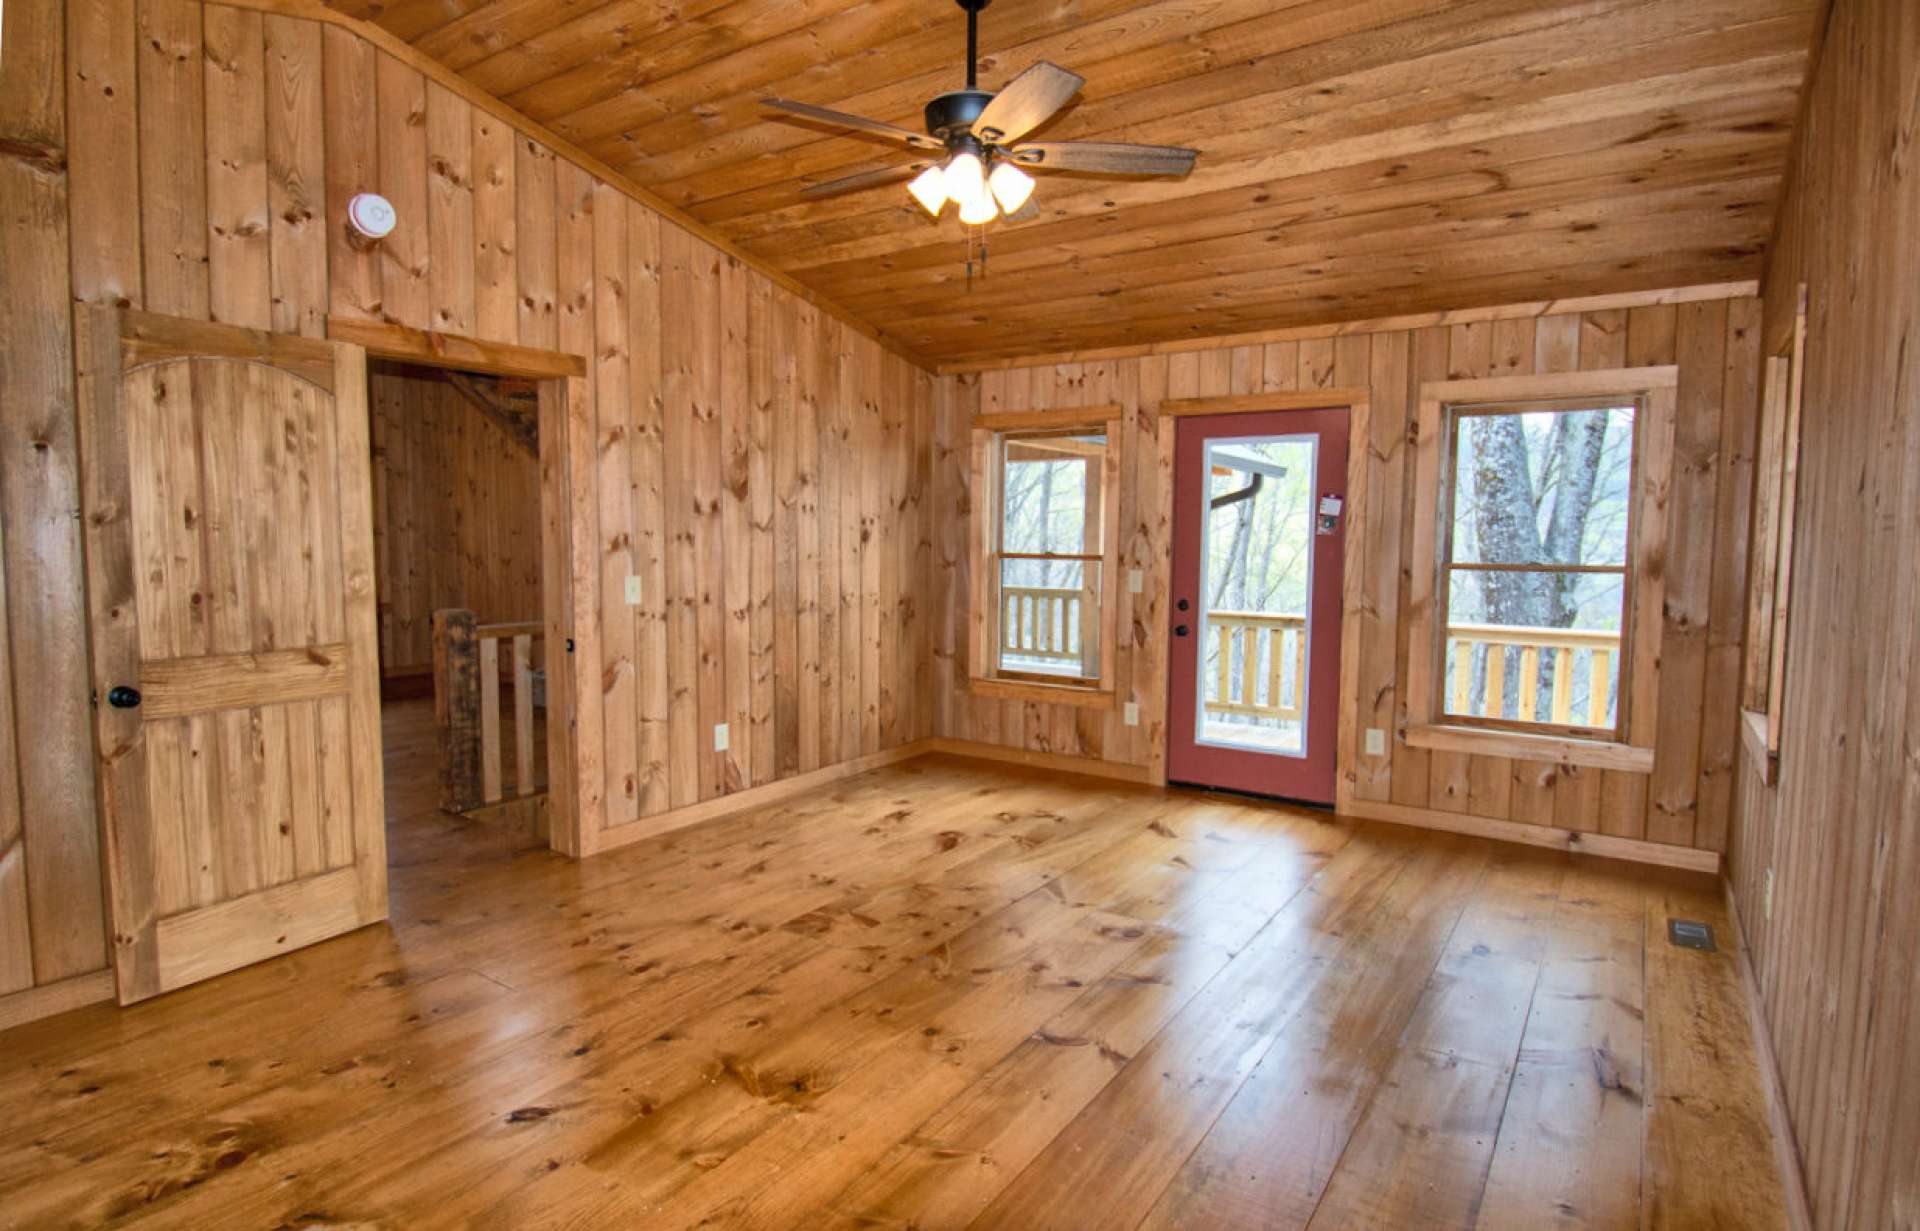 The main level primary bedroom includes a walk-in closet, private bath, and access to the deck.